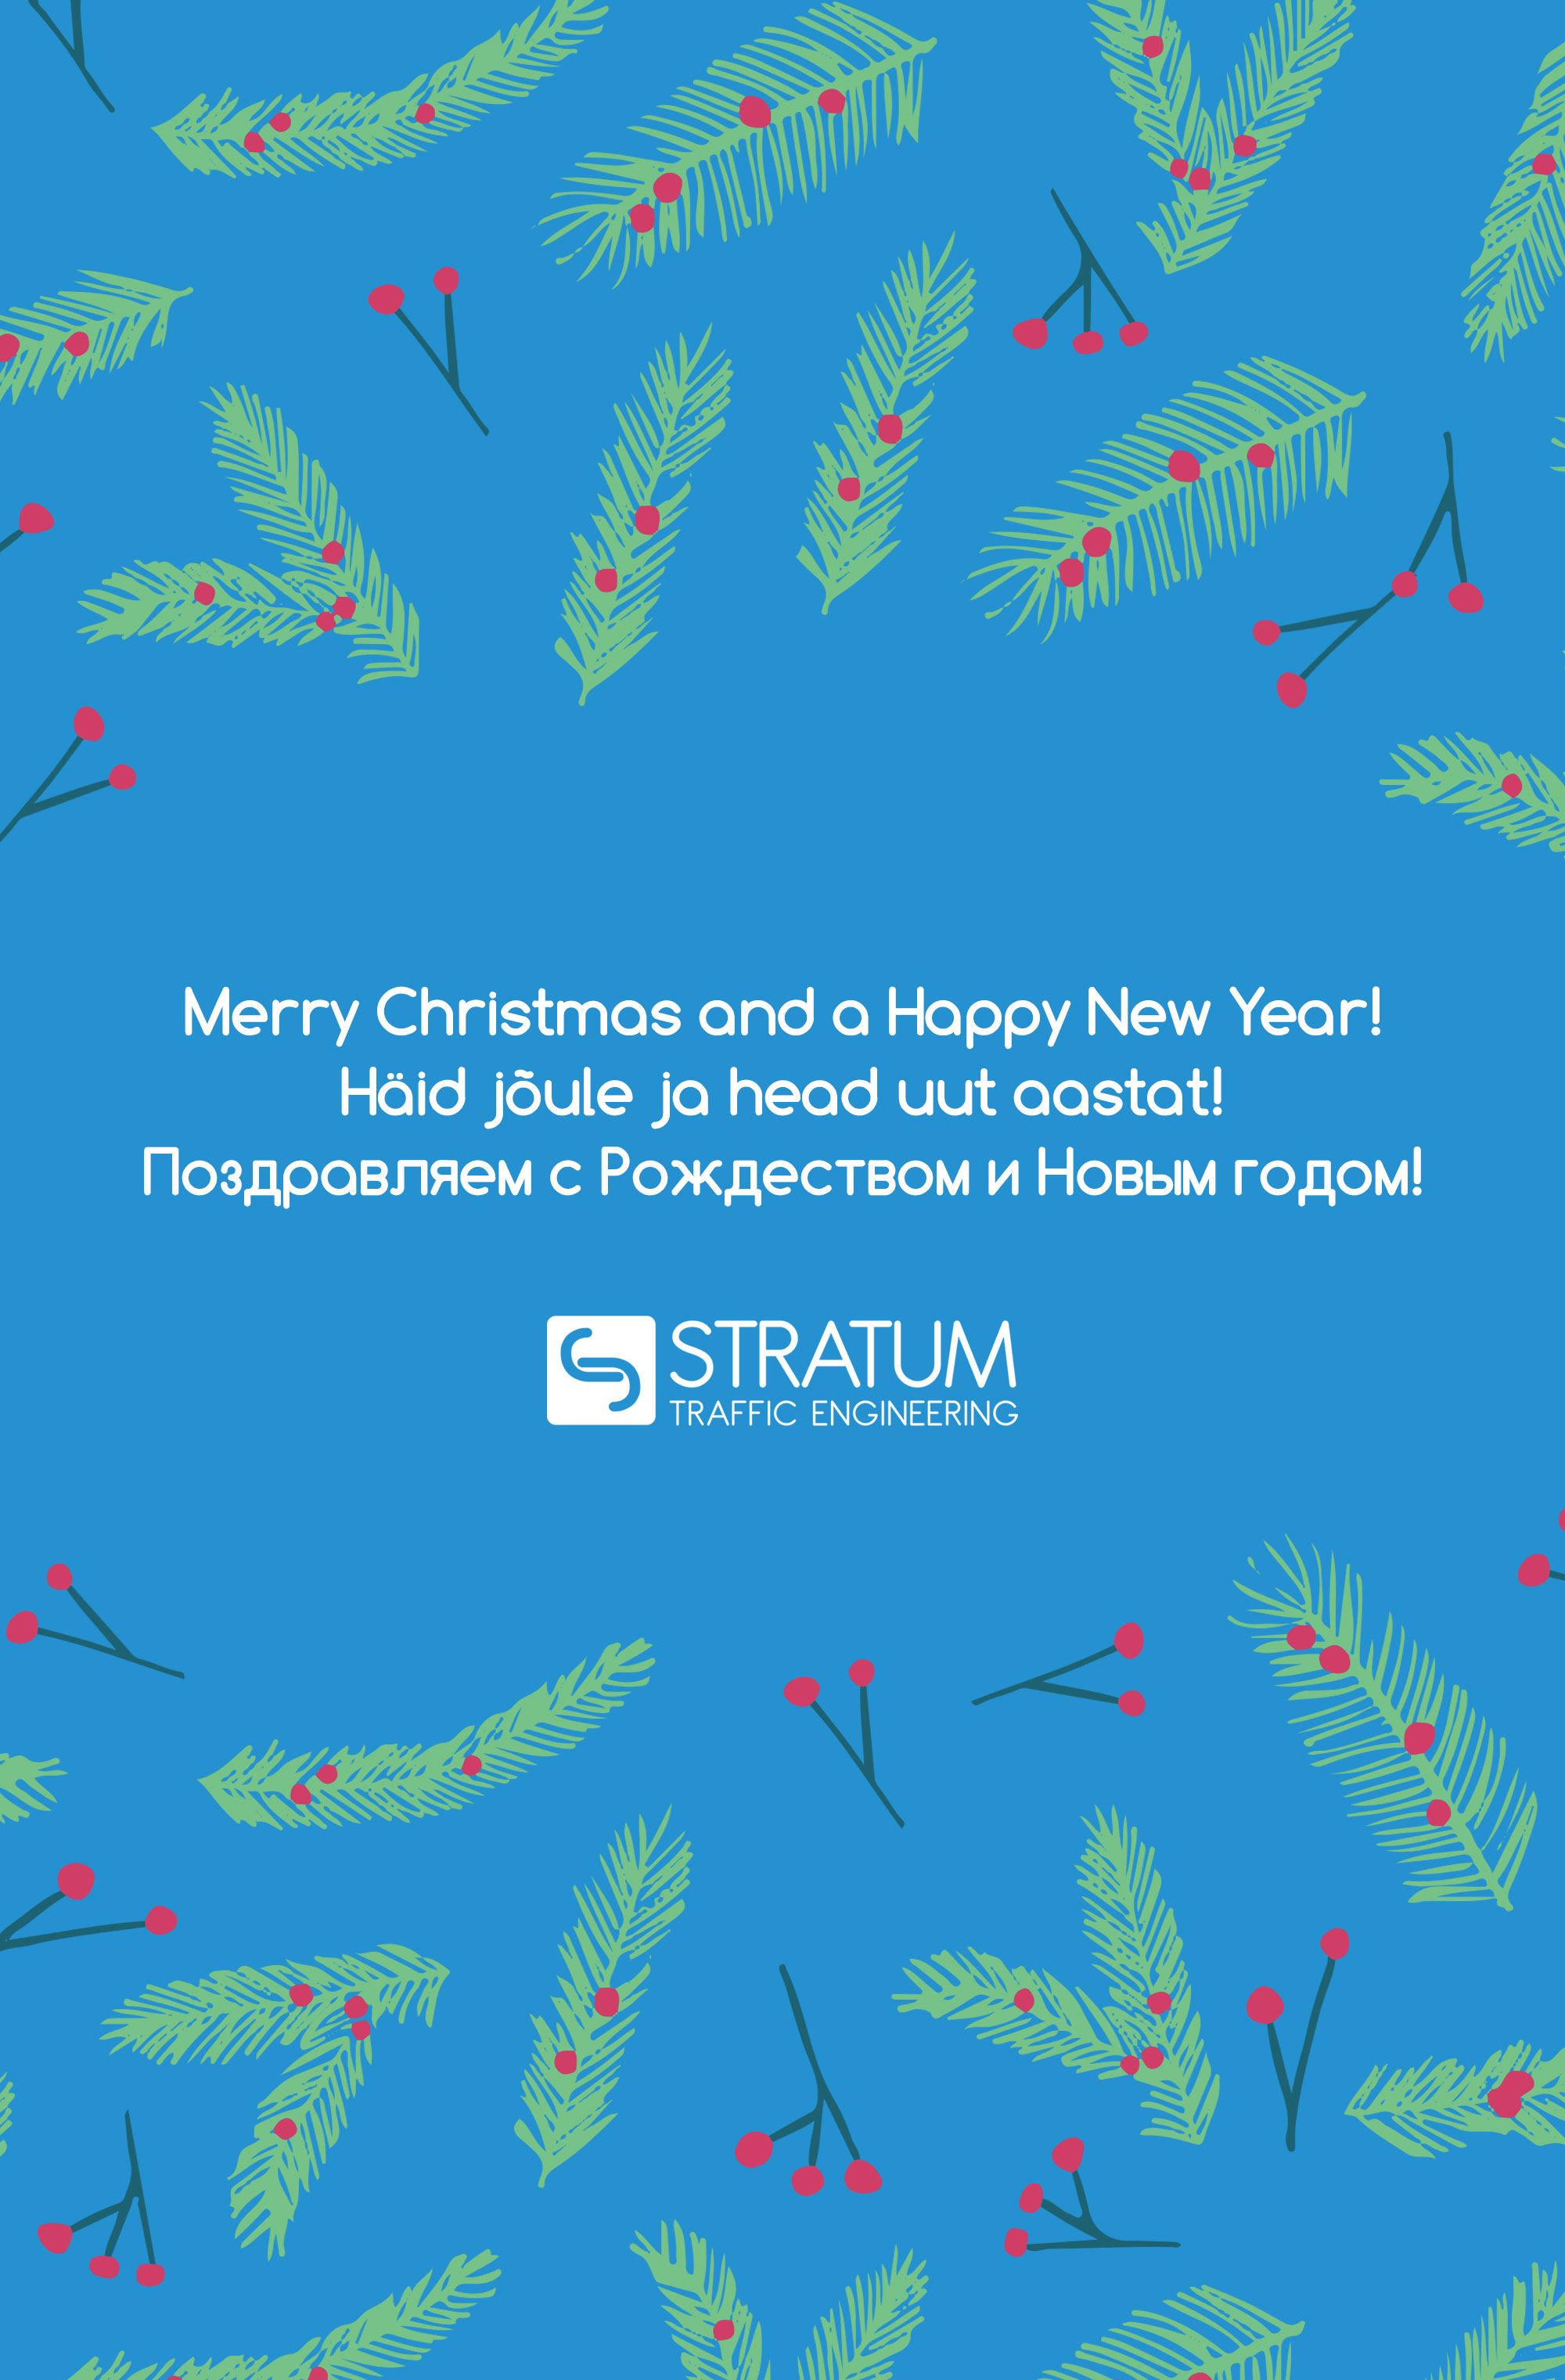 We Are Wishing You Merry Christmas And Happy New Year!